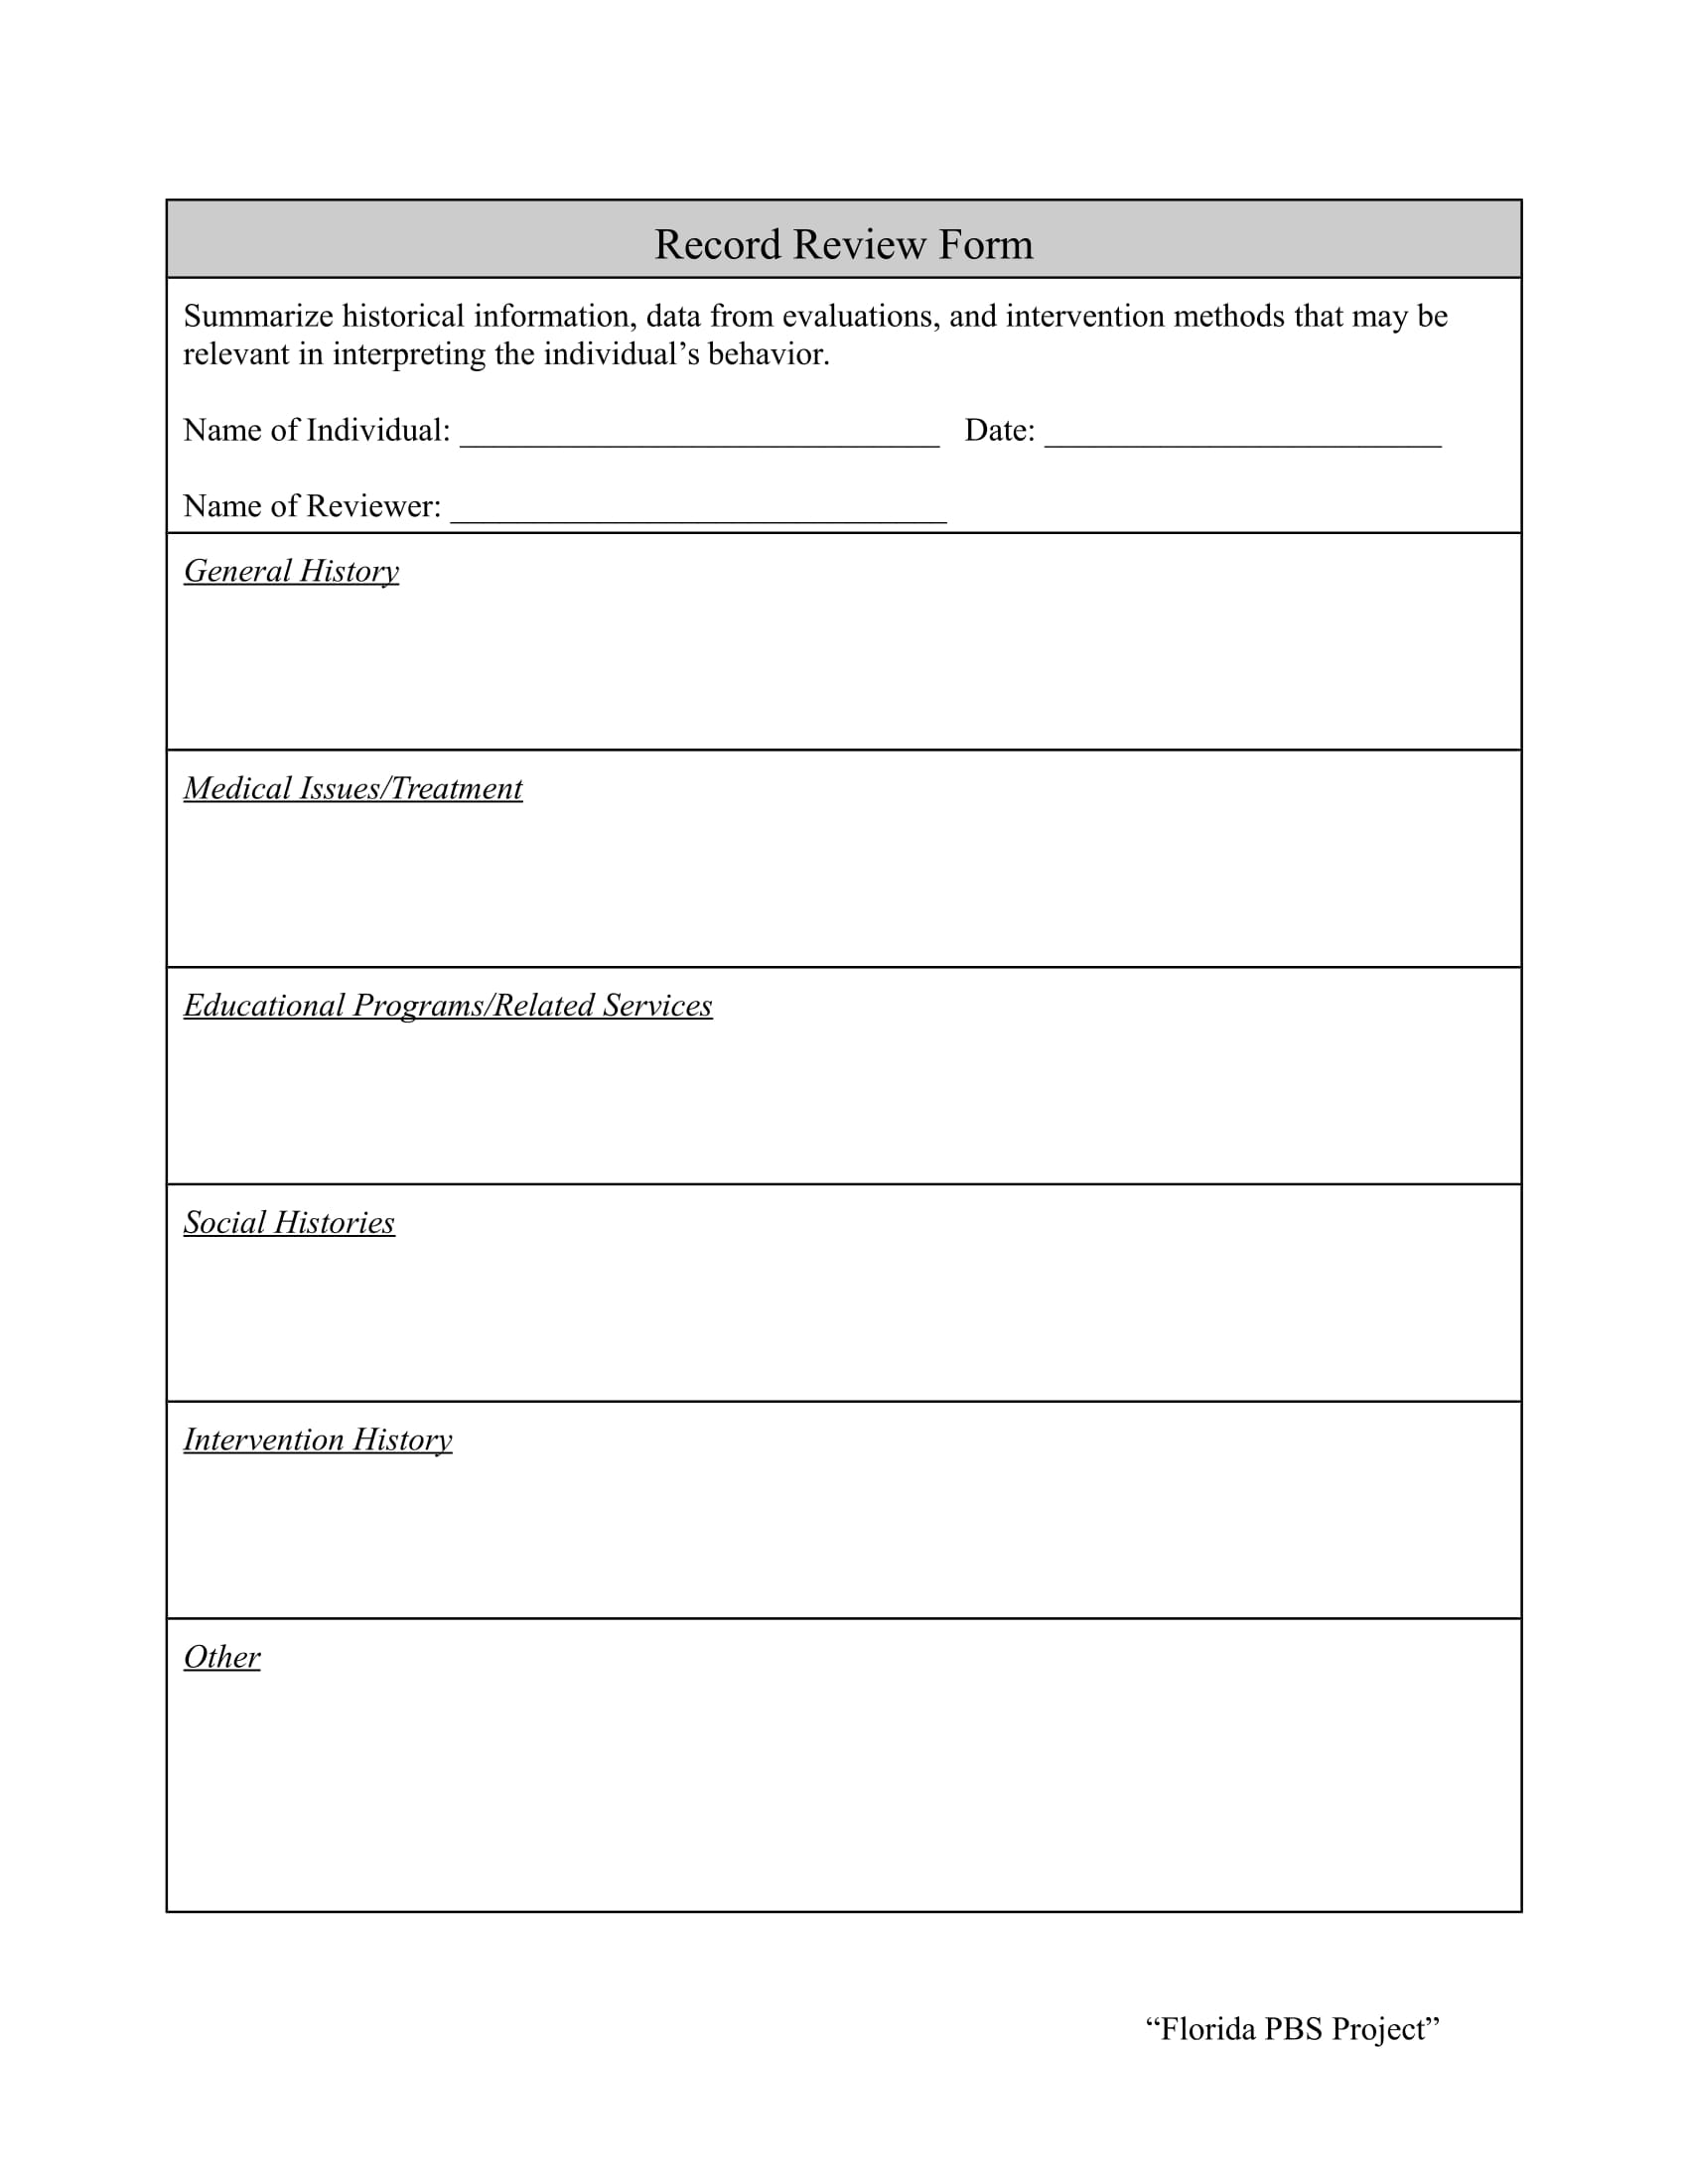 simple record review form 1